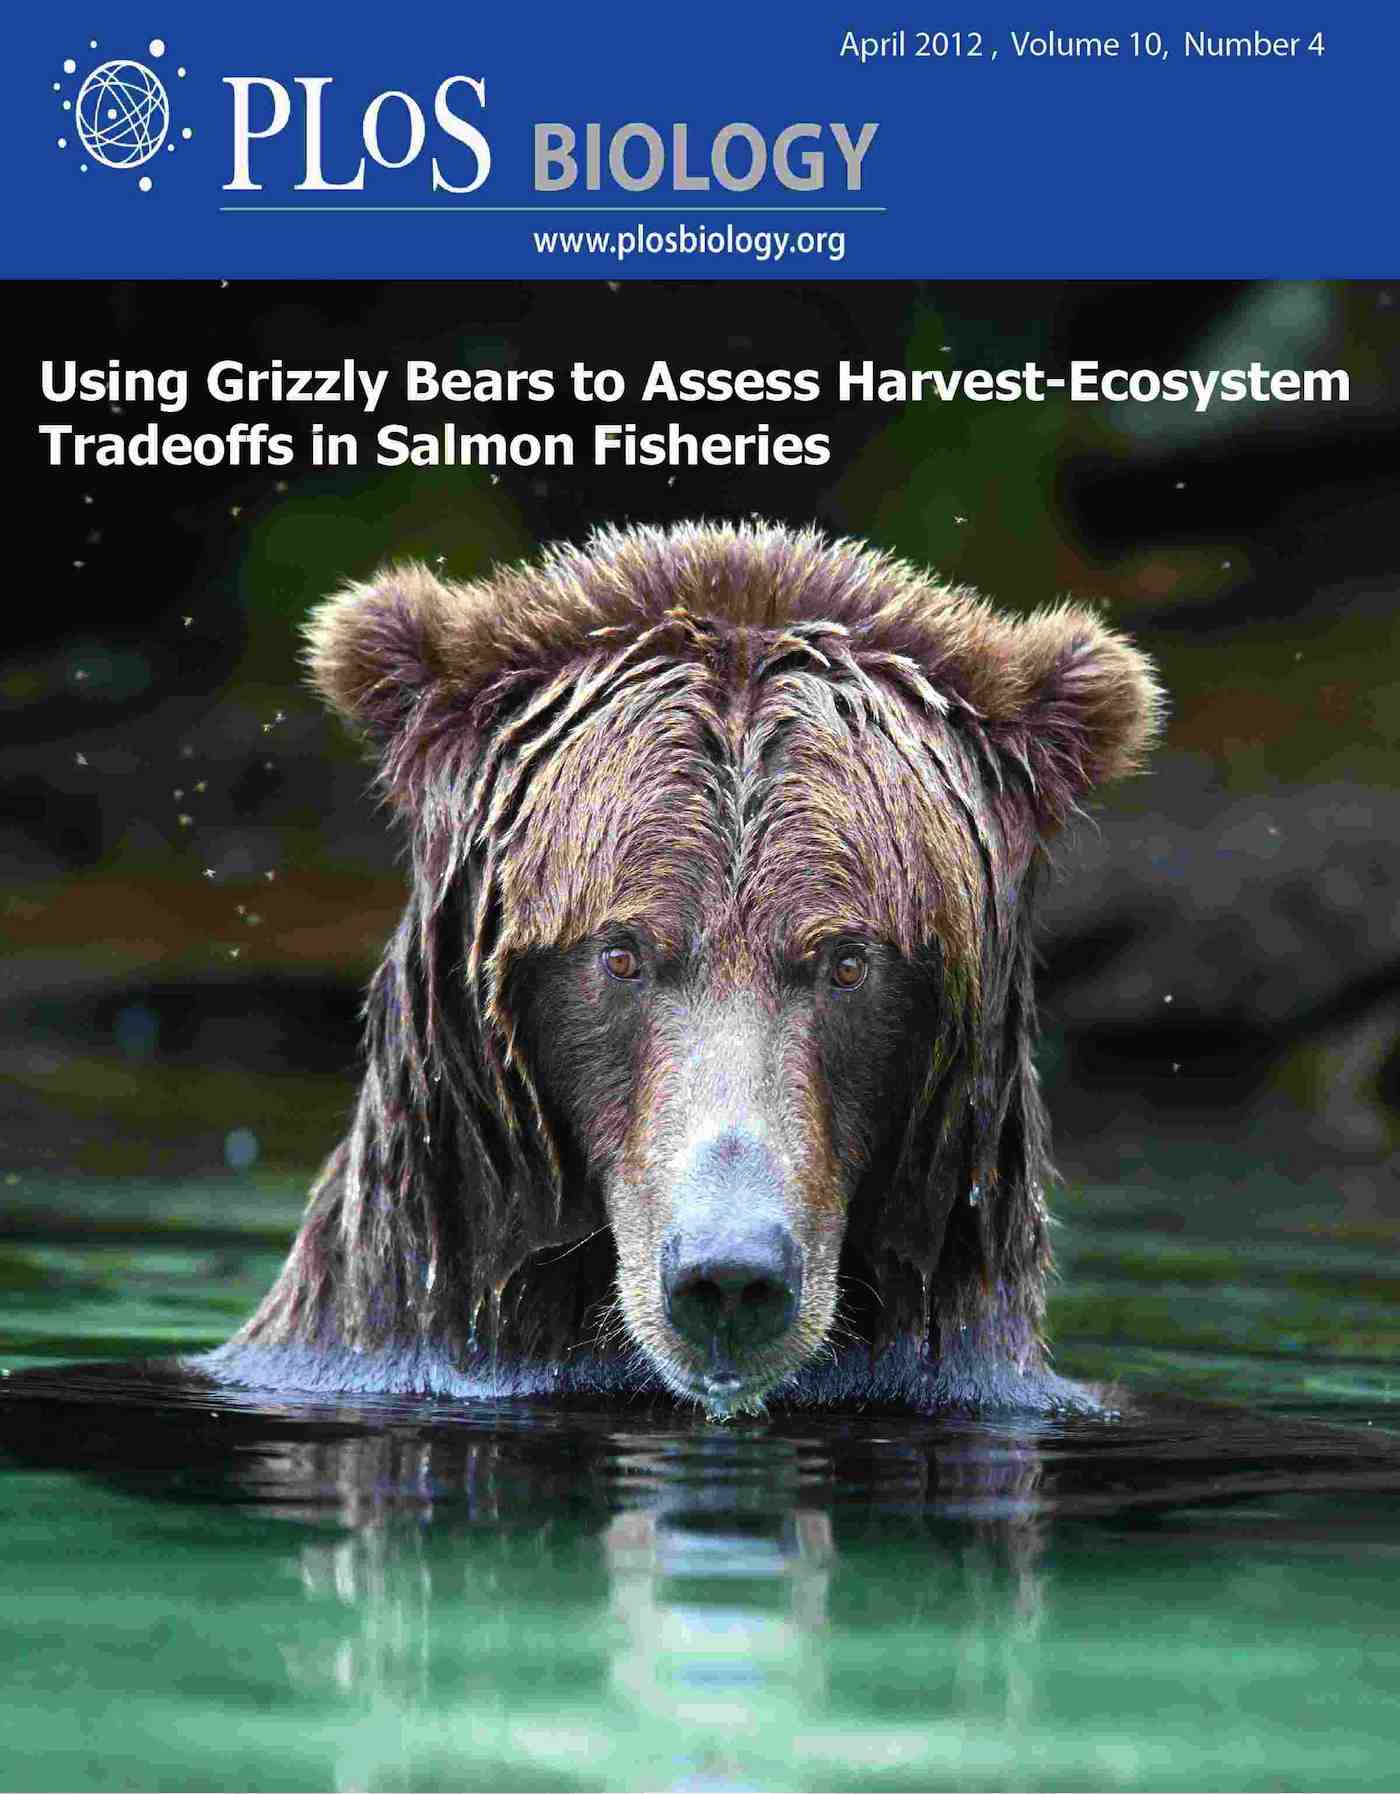 Grizzly bear science article cover.